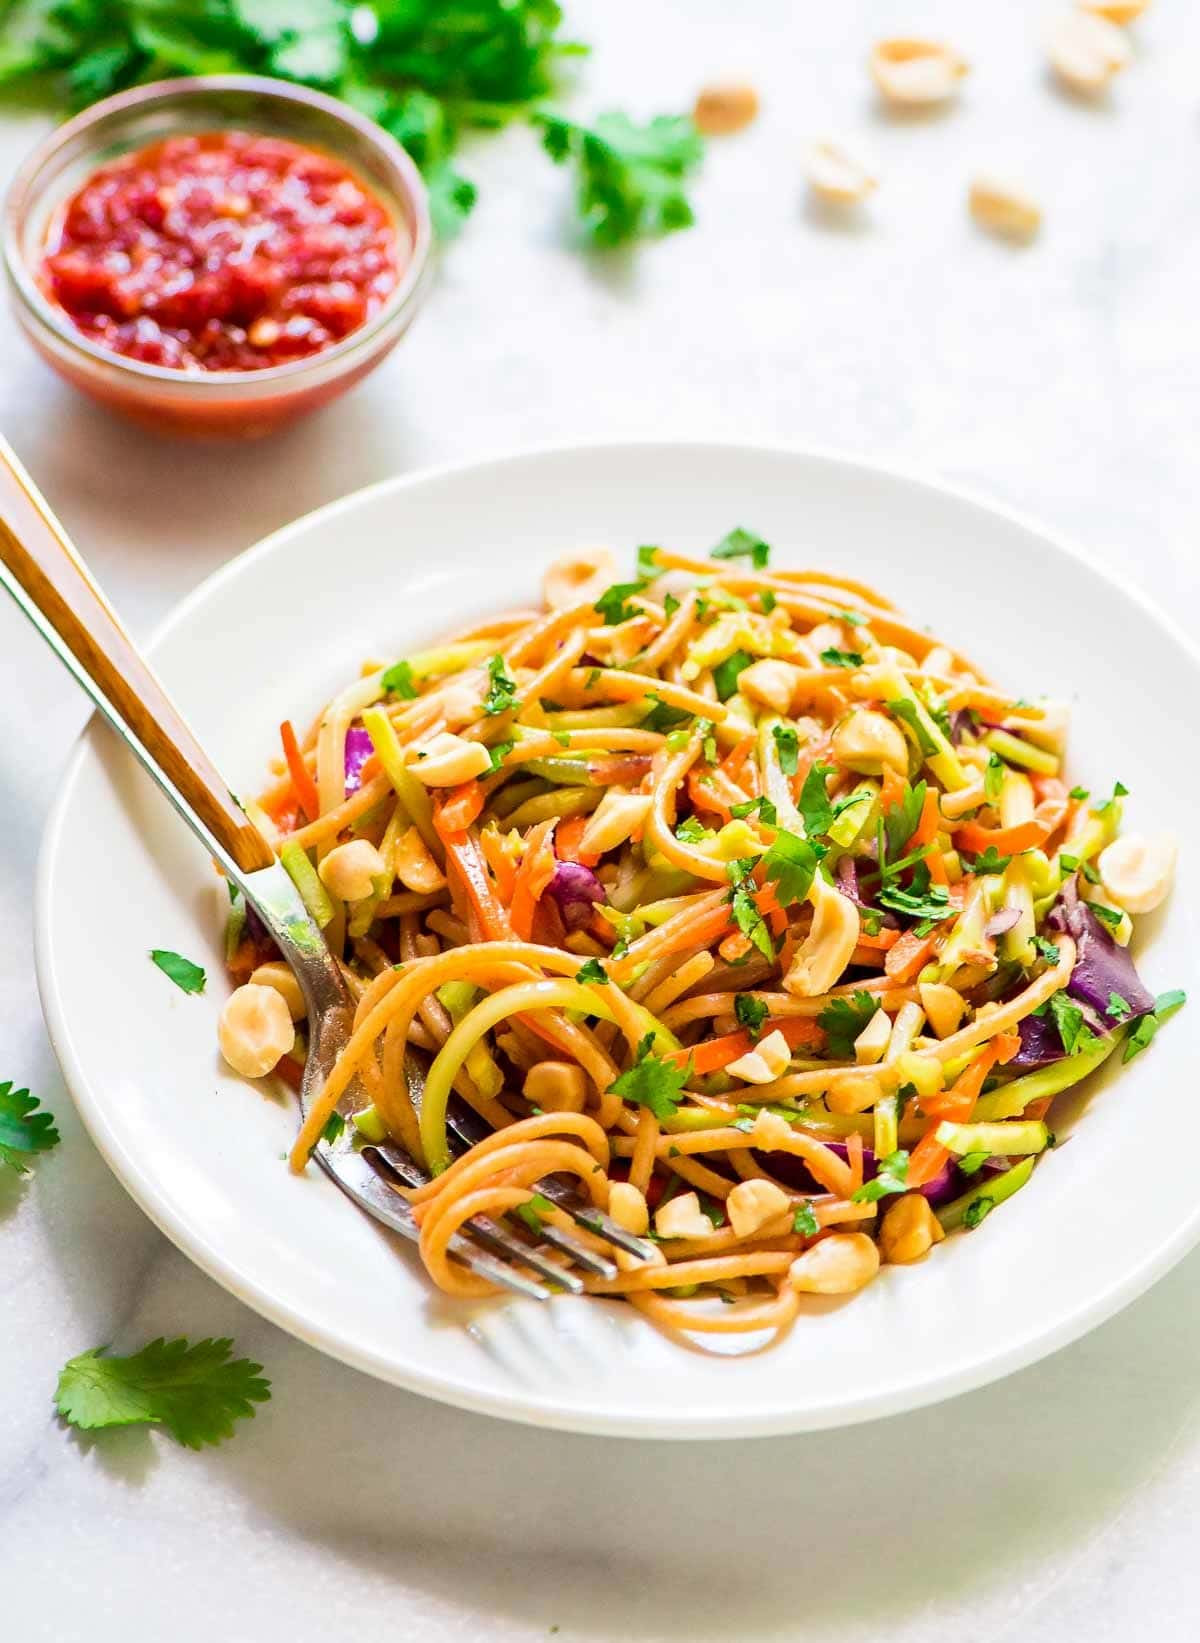 Asian Noodles Salad Recipe
 Asian Noodle Salad With Creamy Peanut Dressing